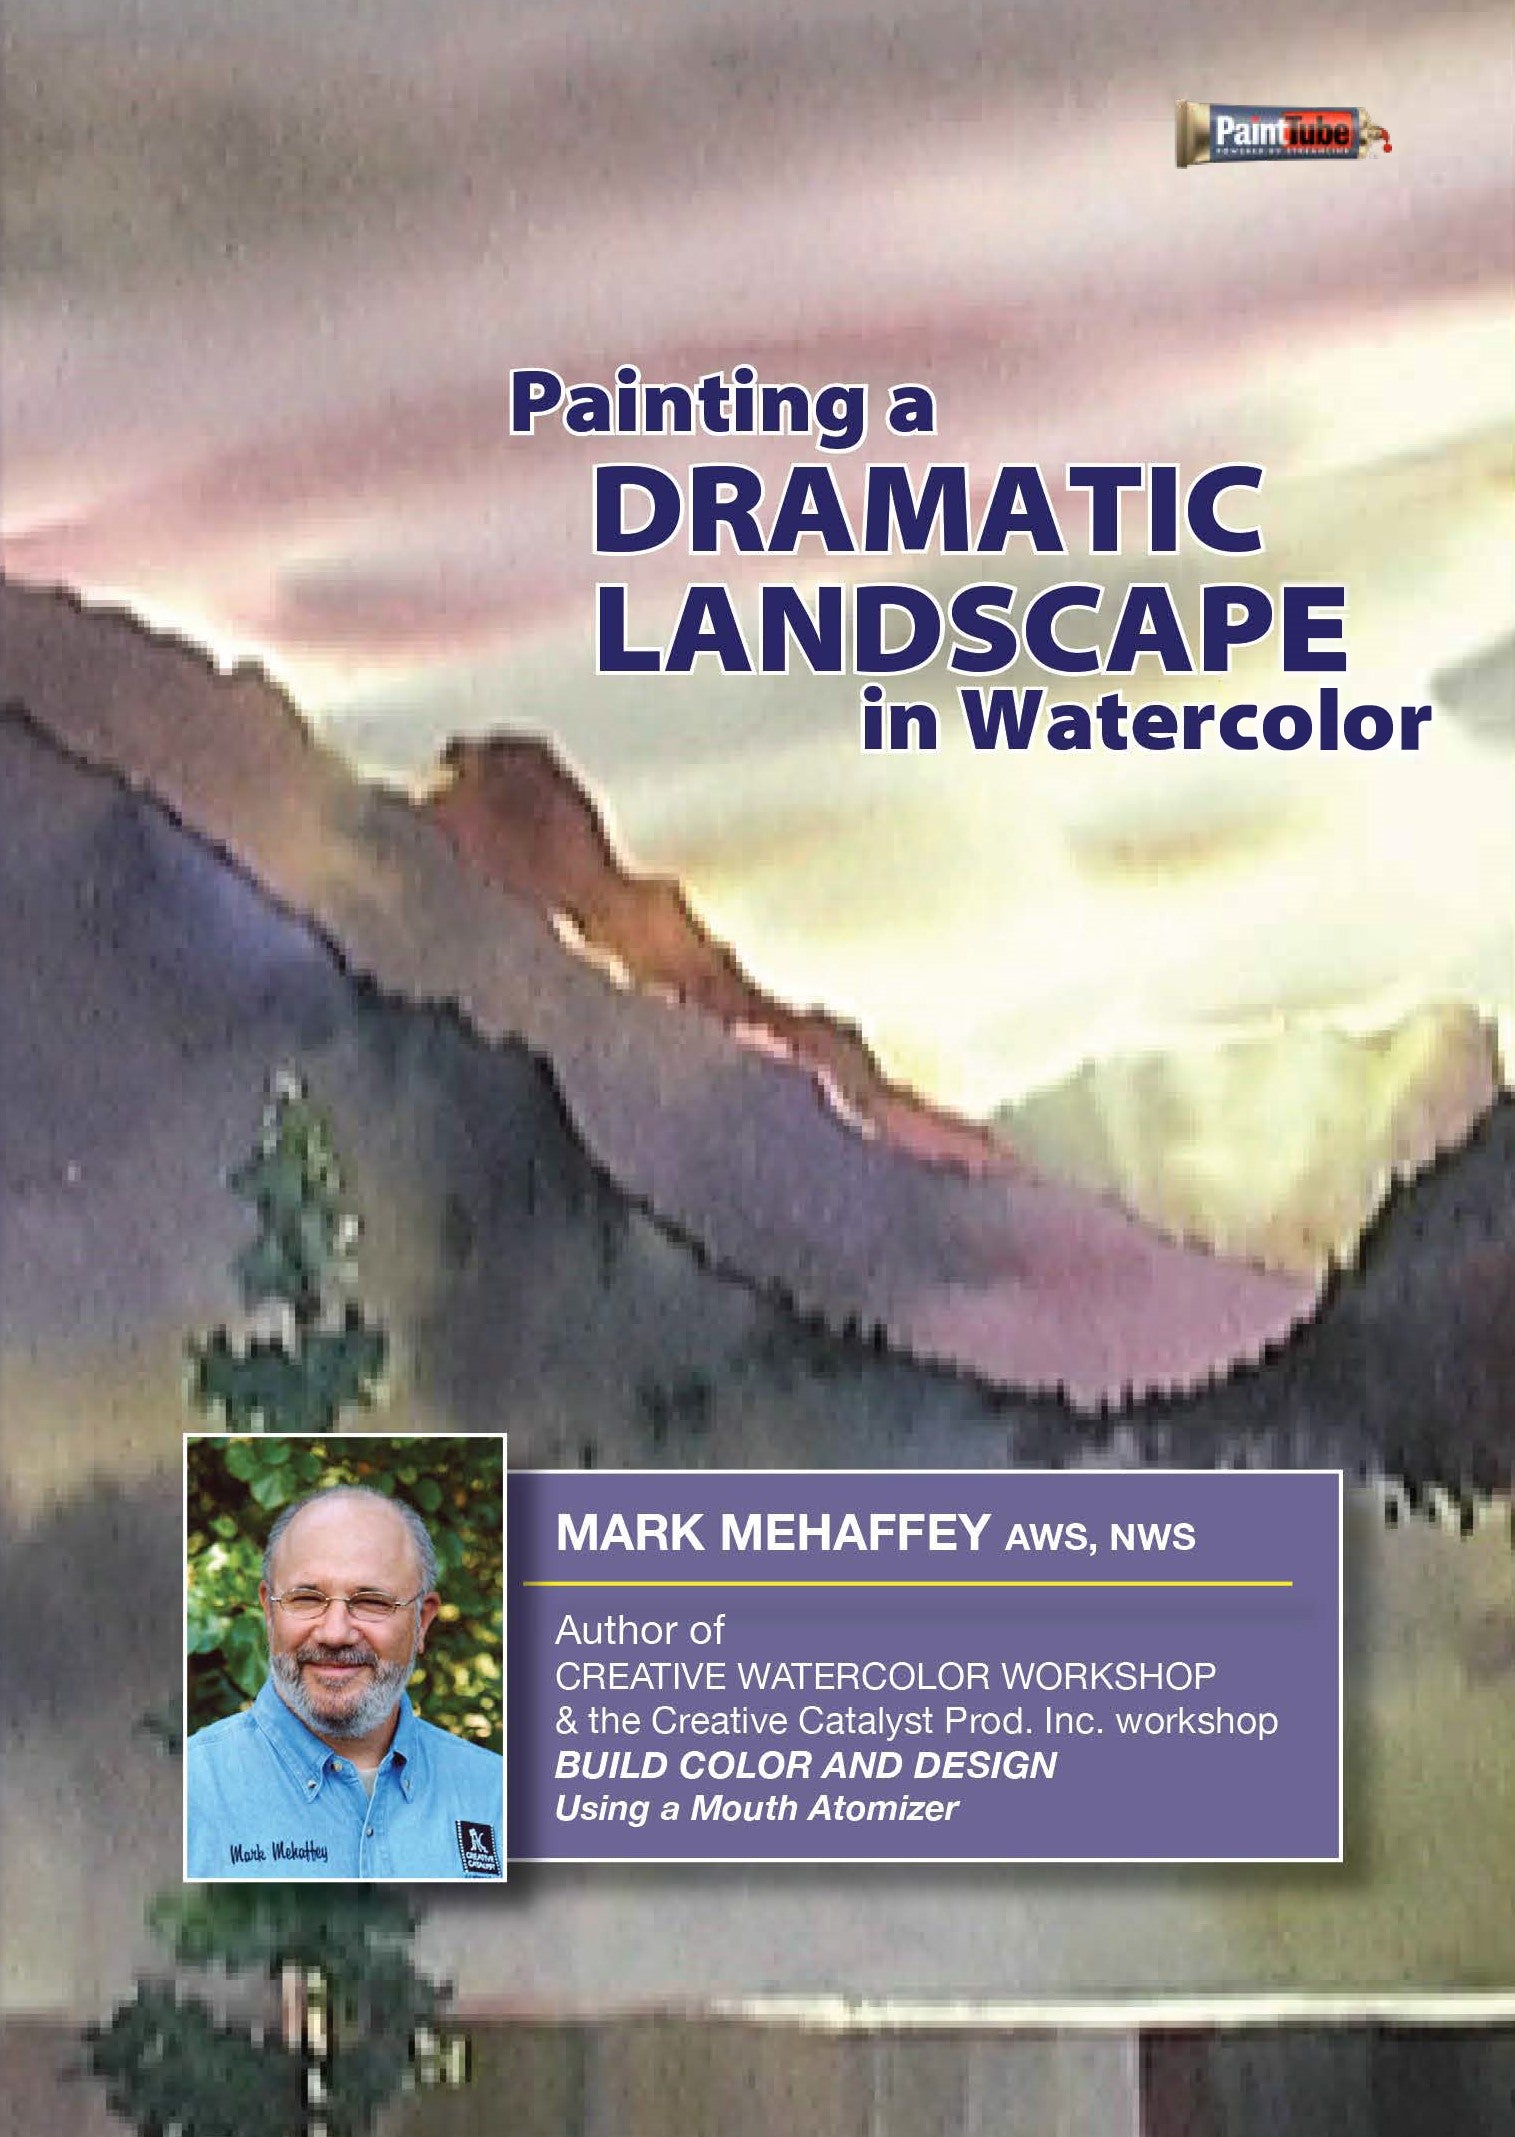 Mark Mehaffey: Painting a Dramatic Landscape in Watercolor